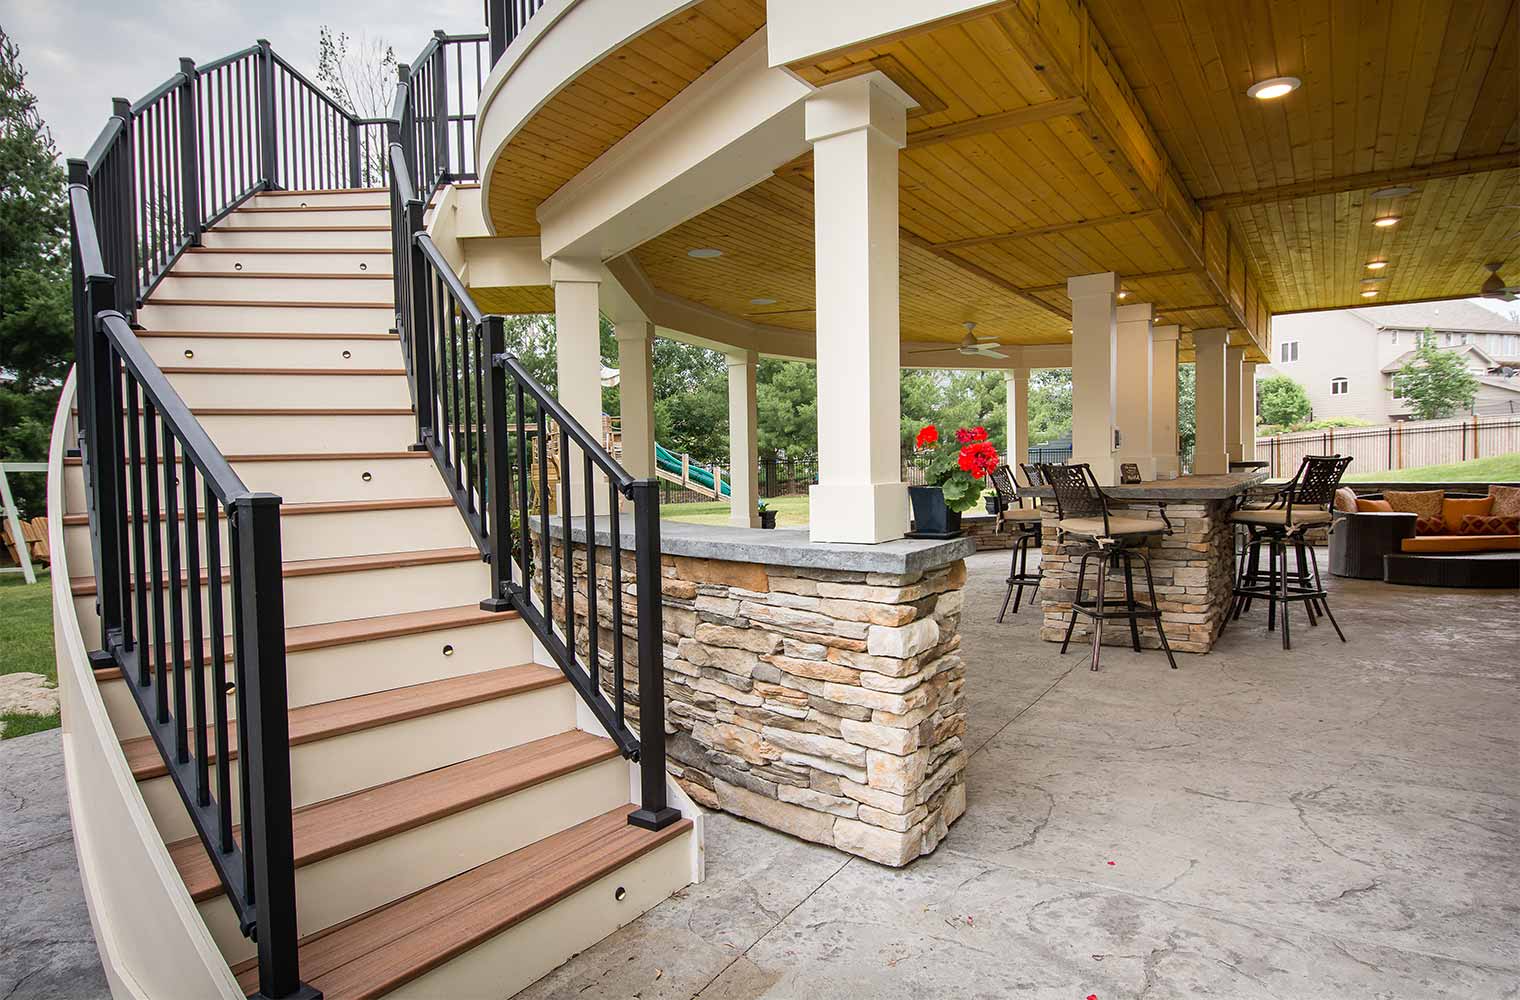 Backyard renovation_Curved and staircase on an Urbandale patio, curved deck and spa features a bar and protected TV, designed and built by remodeler and new home builder Silent Rivers of Des Moines, Iowa